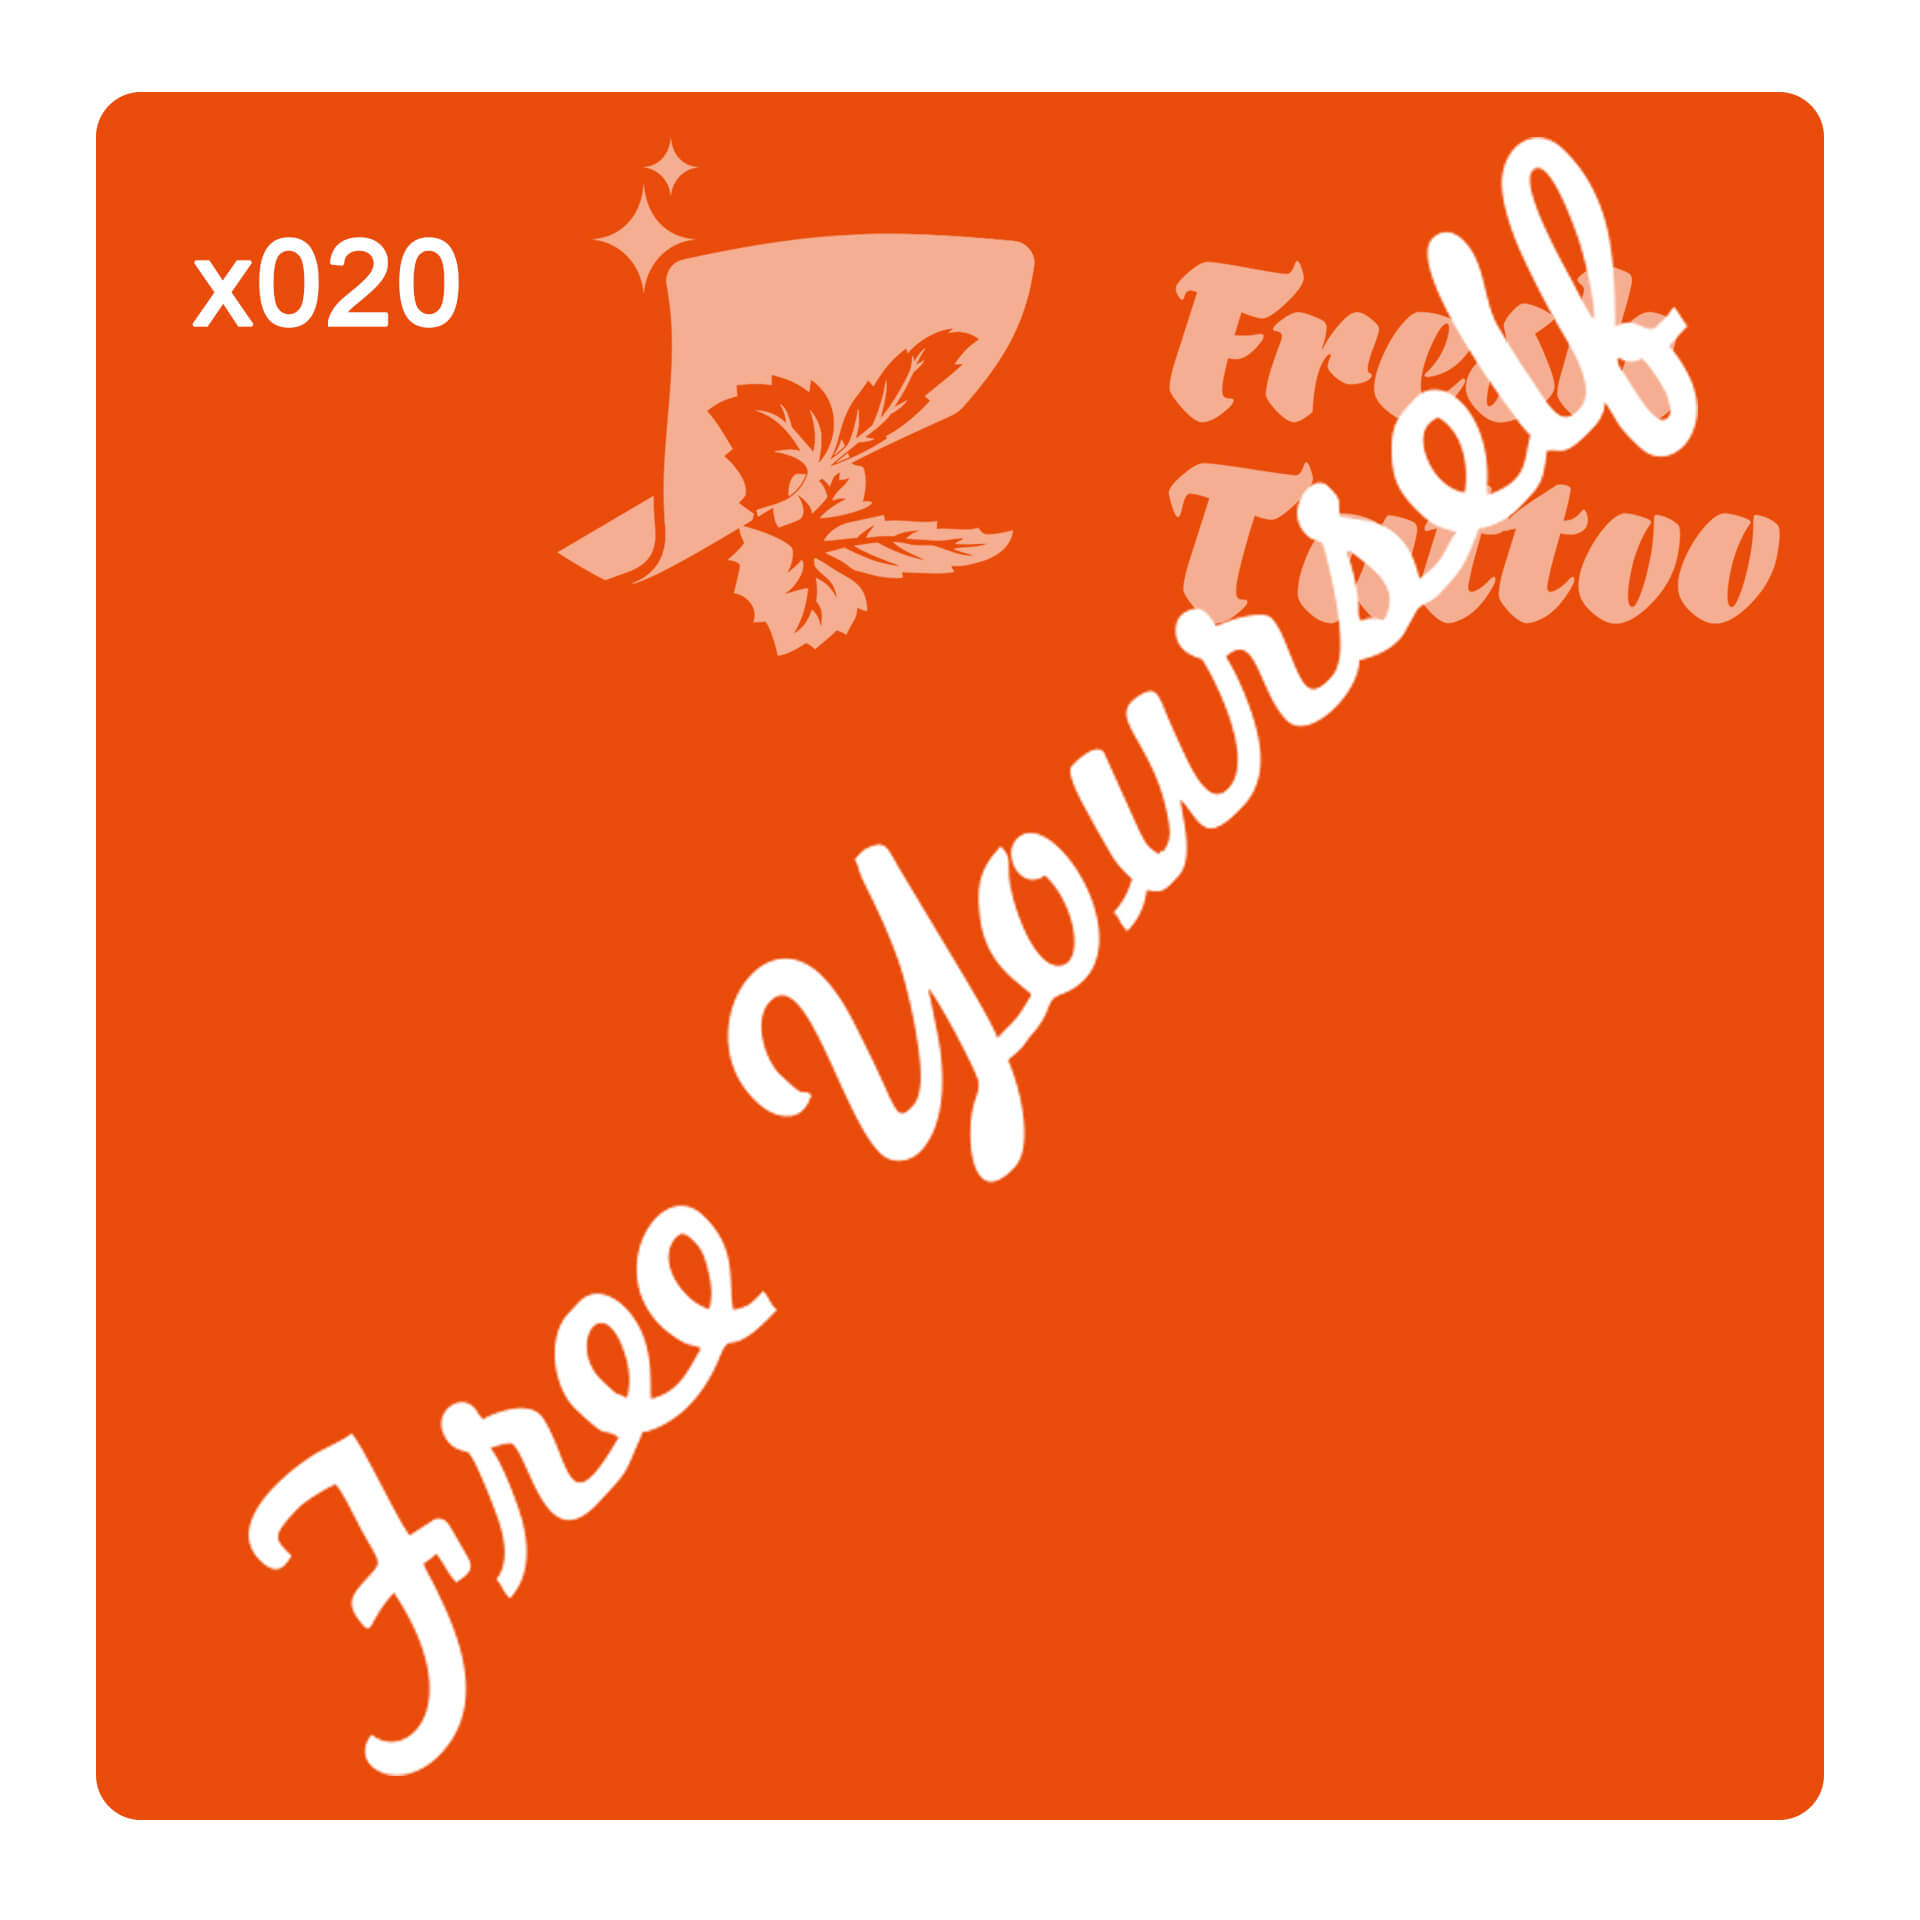 Free yourself x020  